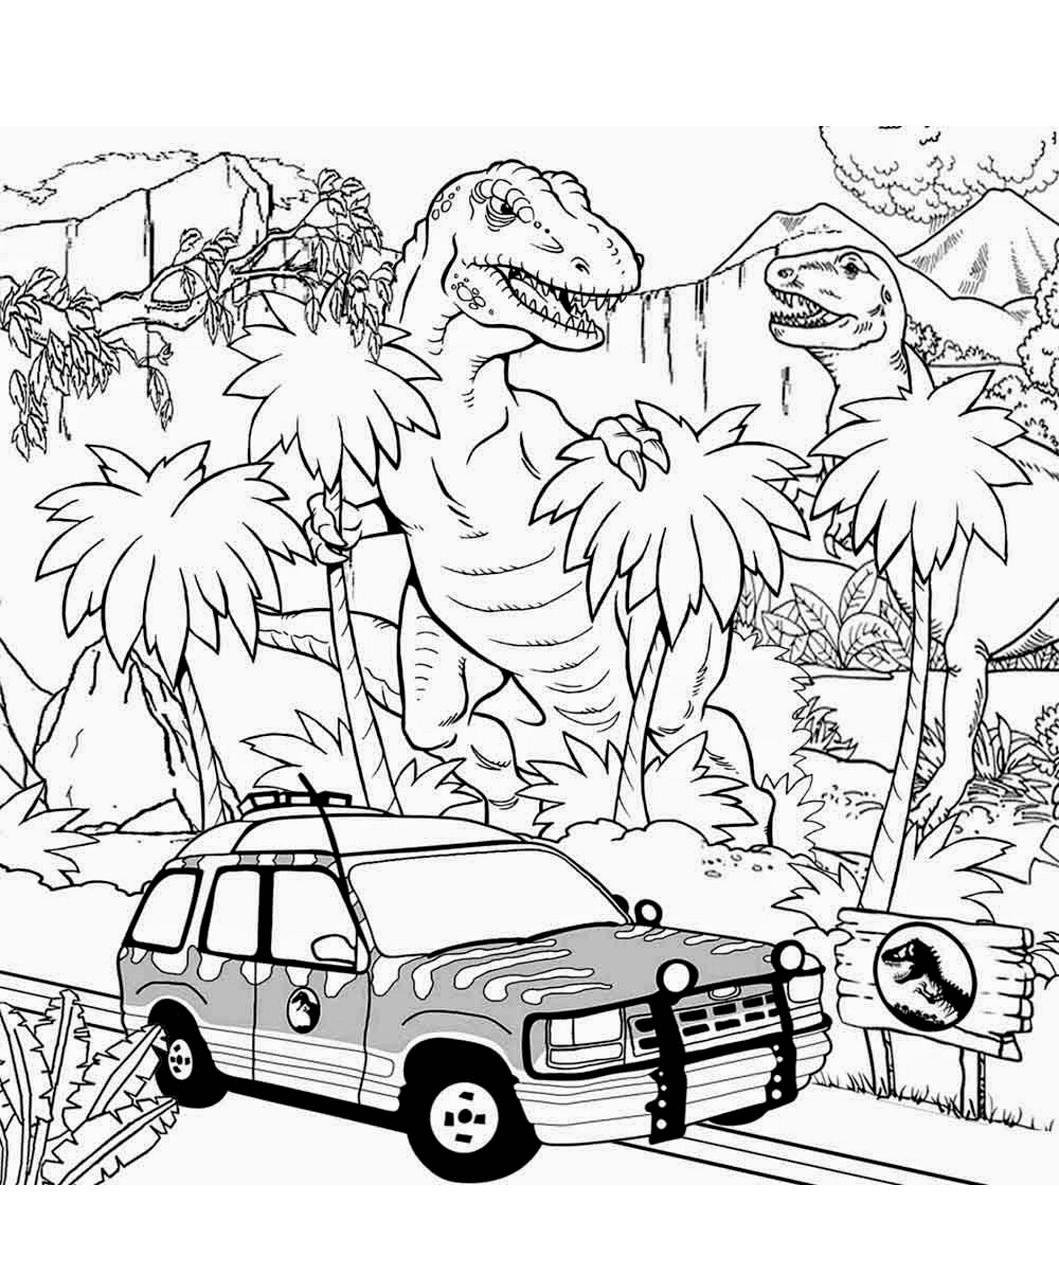 Car In Jurassic World Coloring Page - Free Printable Coloring Pages for Kids